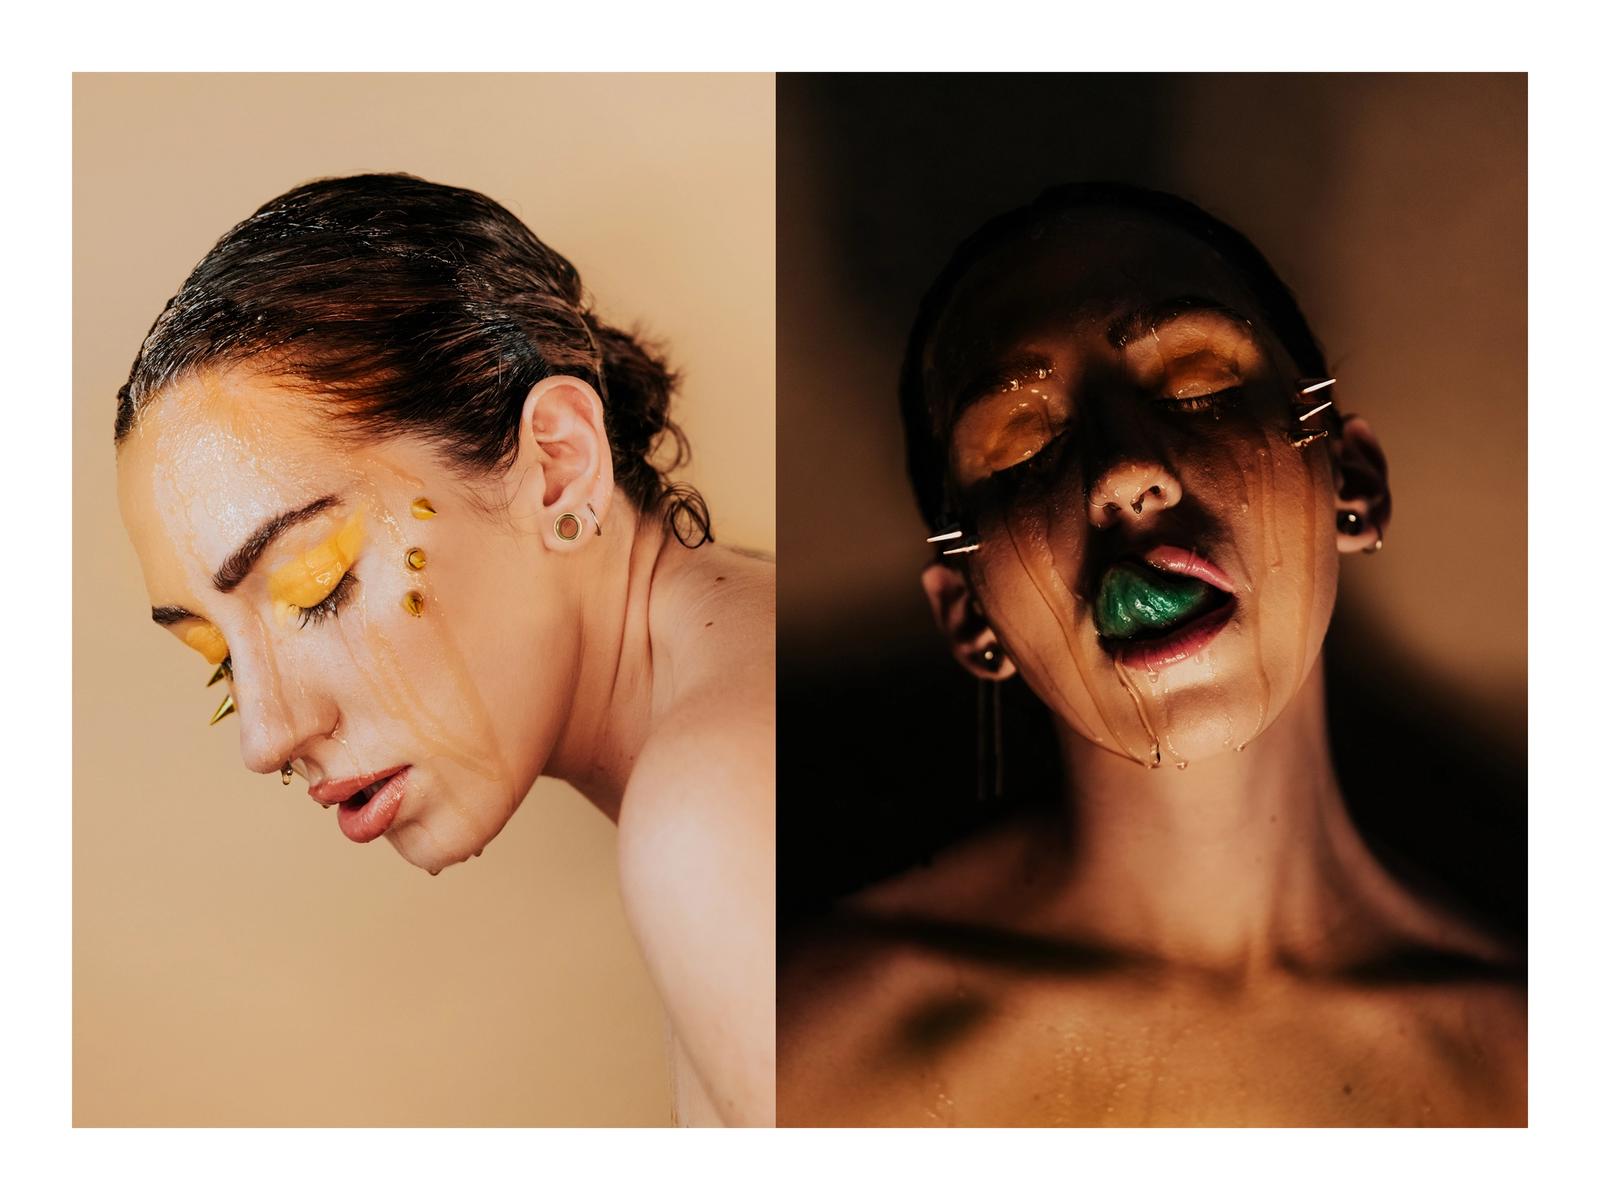 Art direction and photography by Mackenzie Meyer. Model and makeup artist Leigh Stolarz 